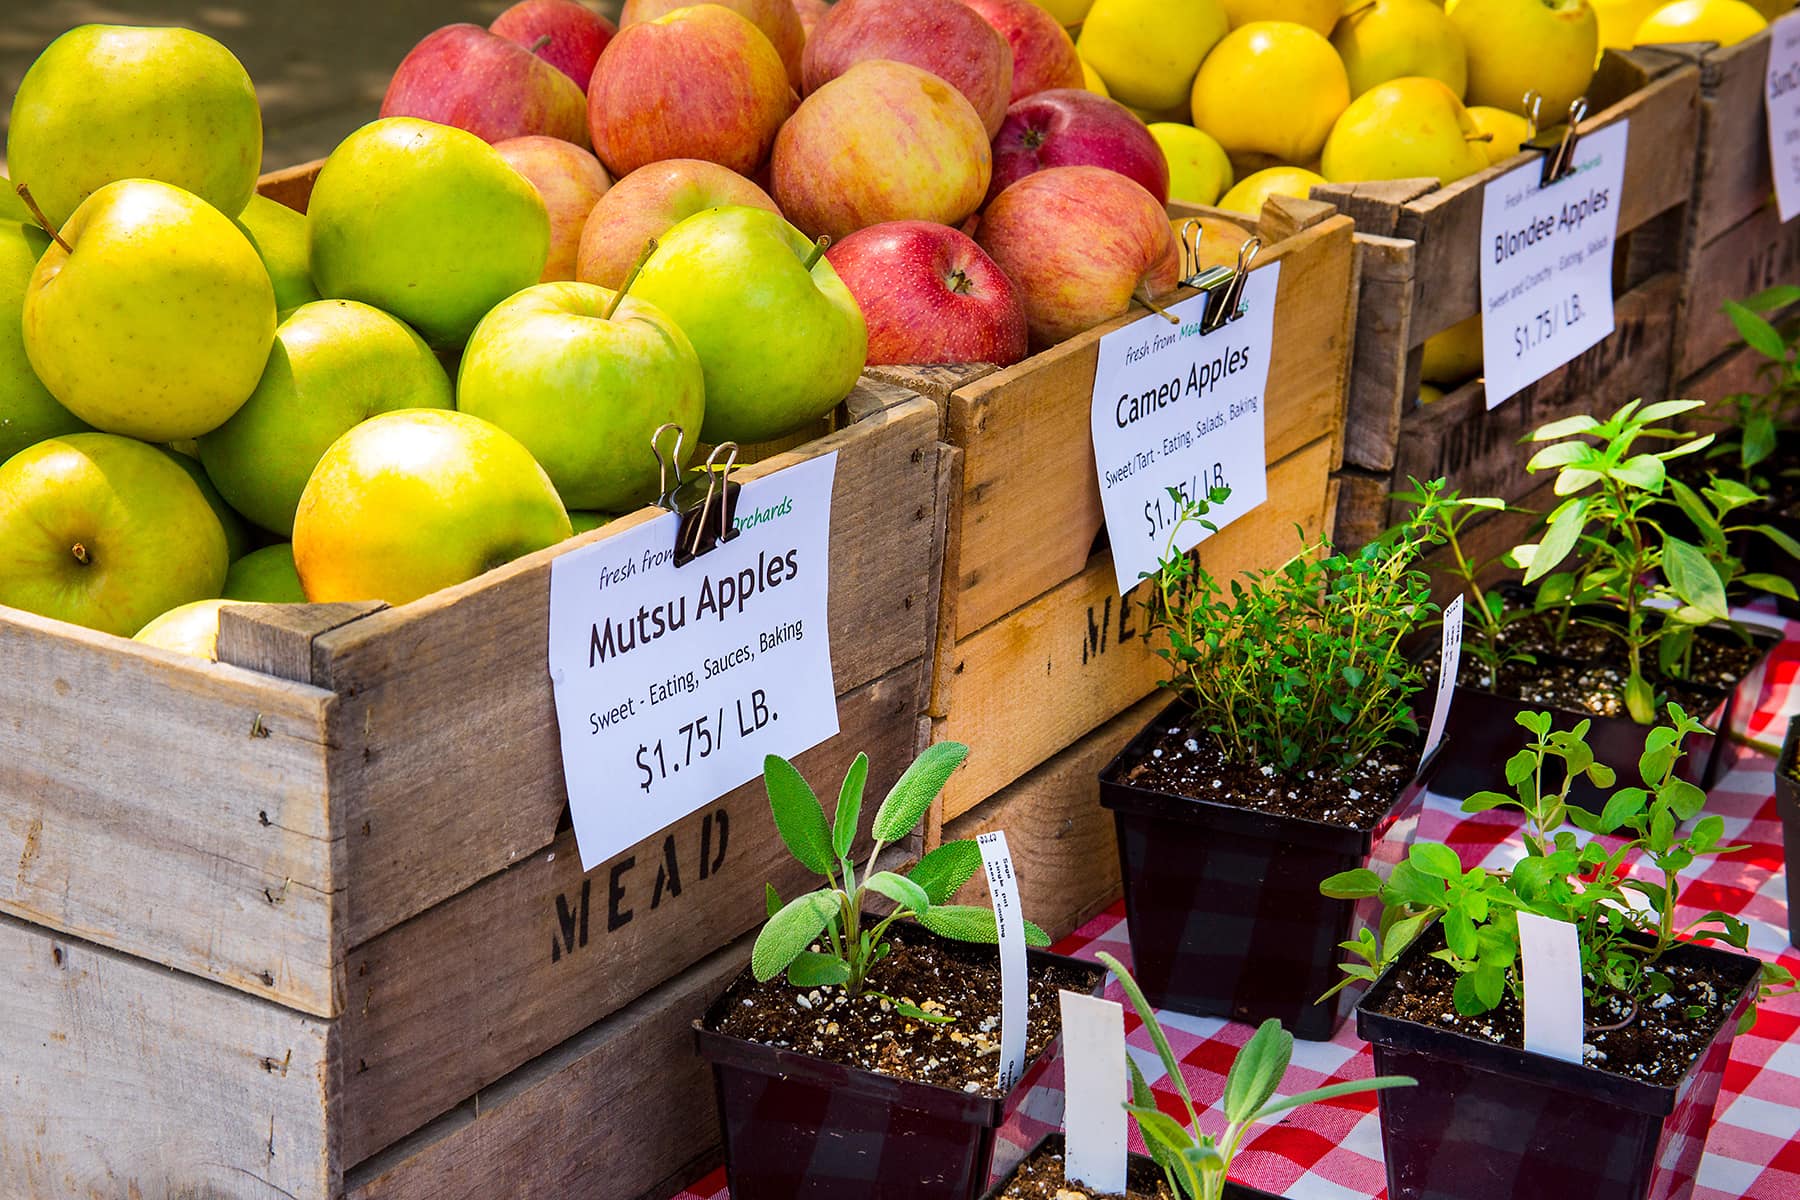 Apples and Herbs Detail at Farmers Market